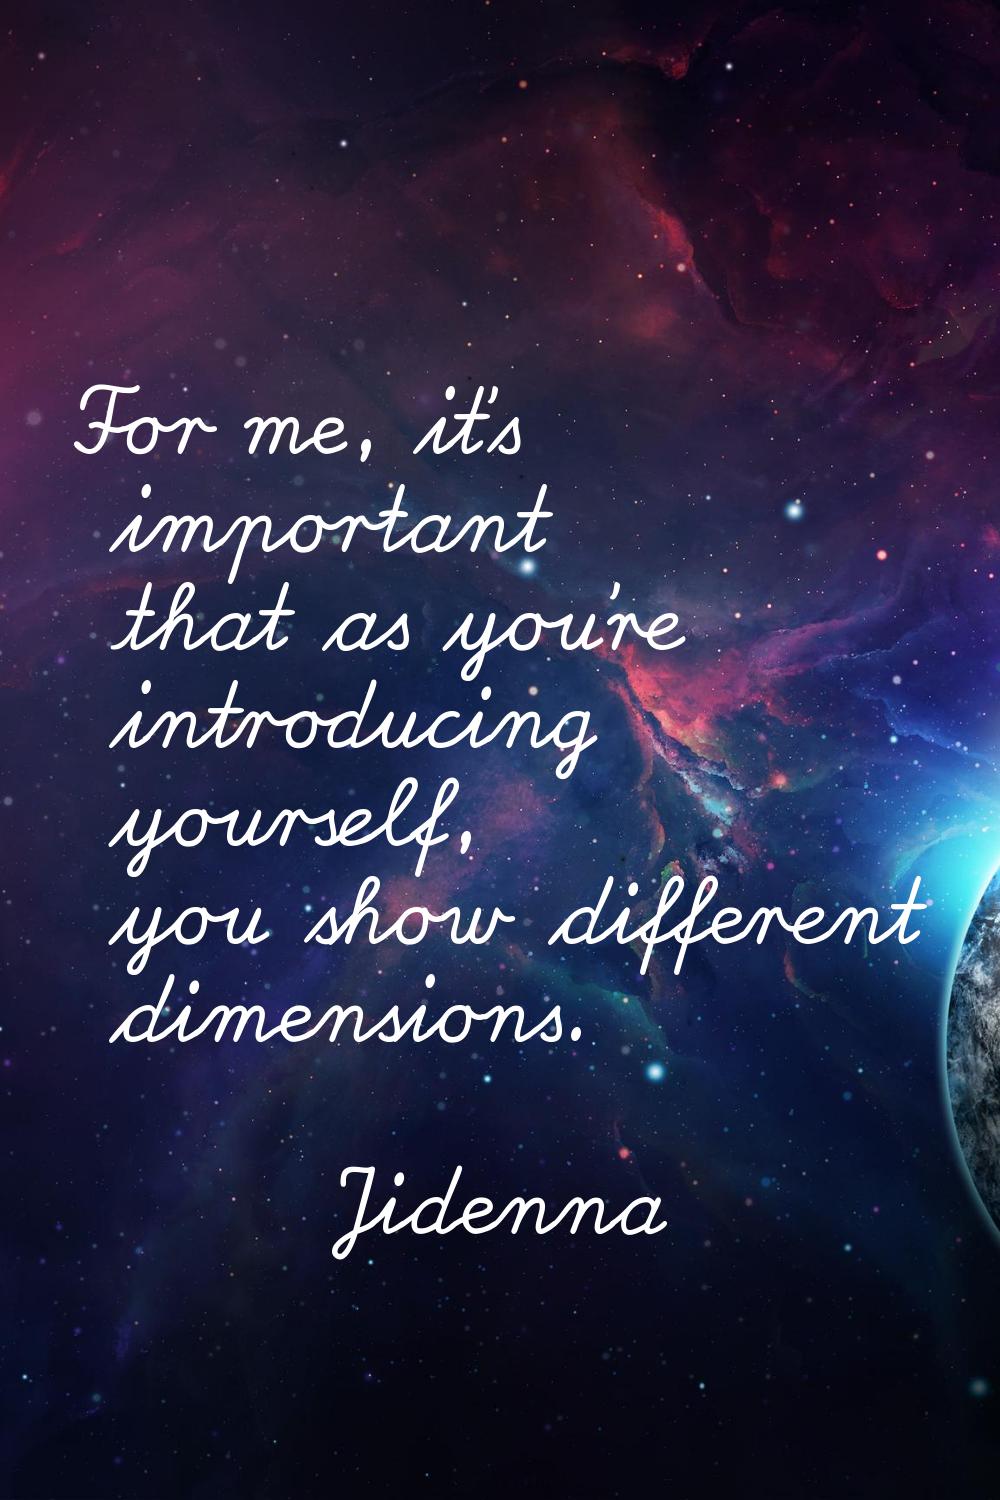 For me, it's important that as you're introducing yourself, you show different dimensions.